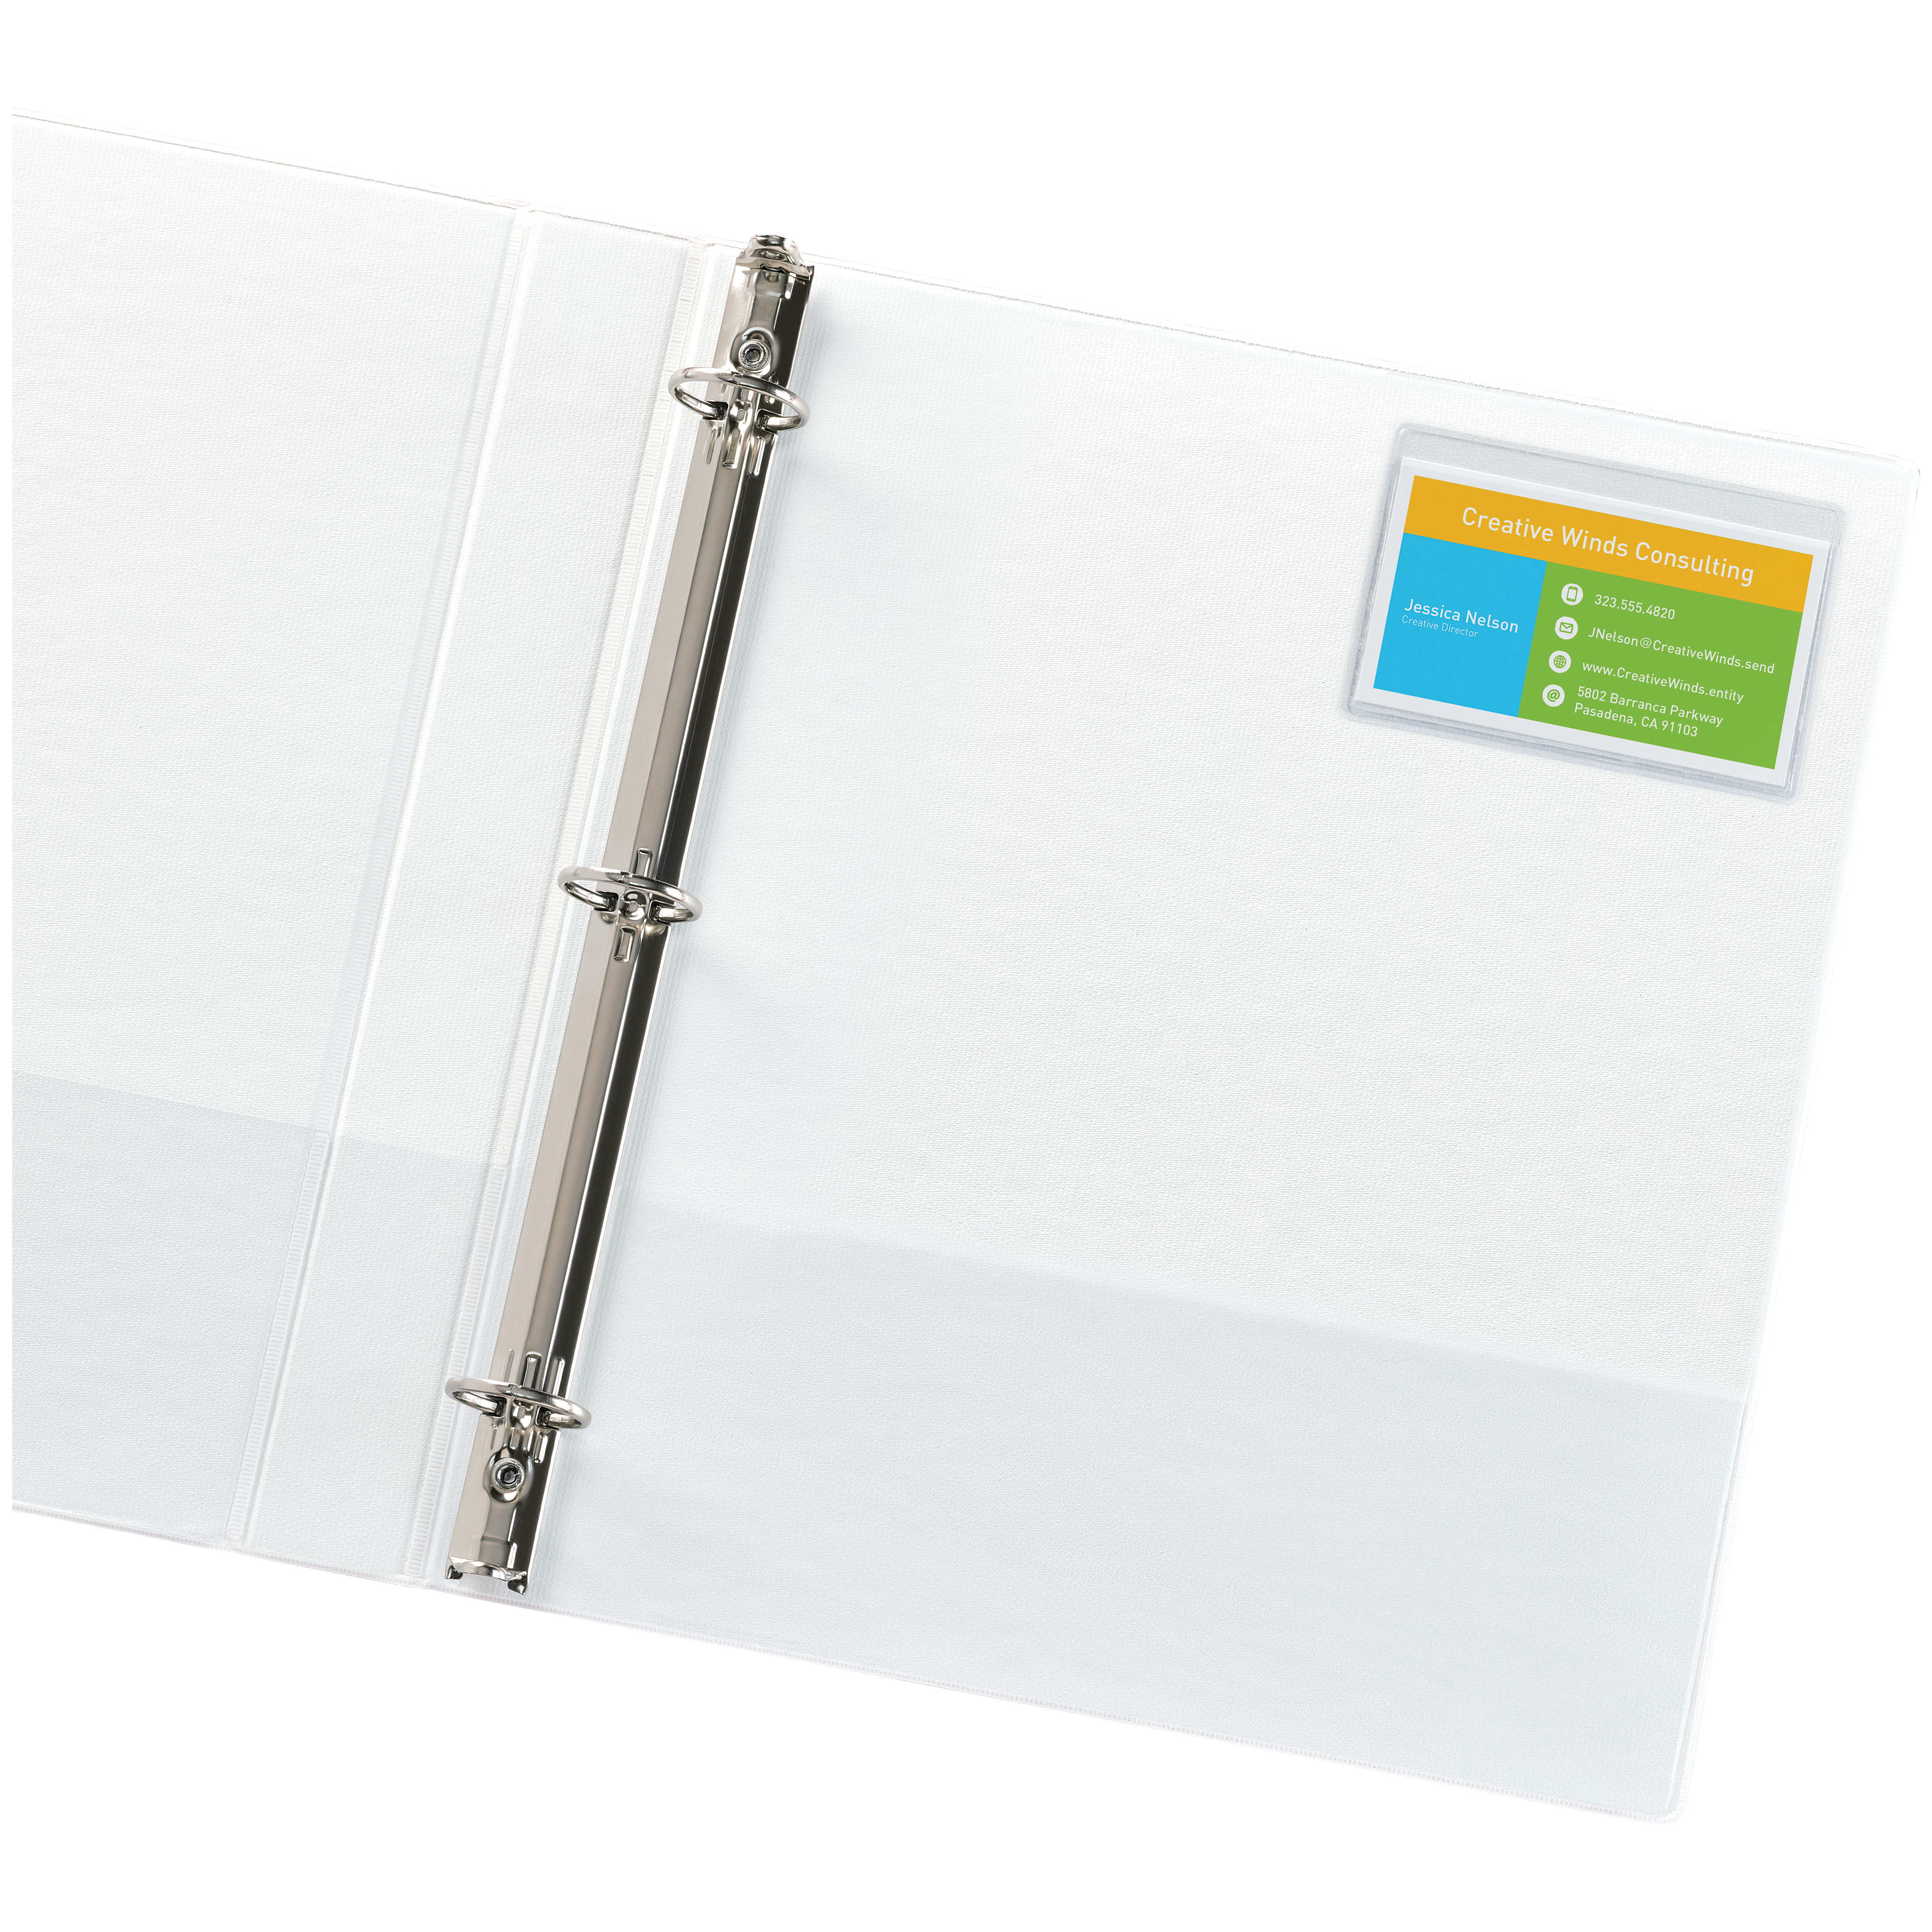  StoreSMART® - Photo/Postcard Page for 3-Ring Binders -  Archival-Safe Plastic - Three 4 x 6 Pocket - Holds six Photos/Postcards -  25 Pack - LC46-25 : Sheet Protectors : Office Products